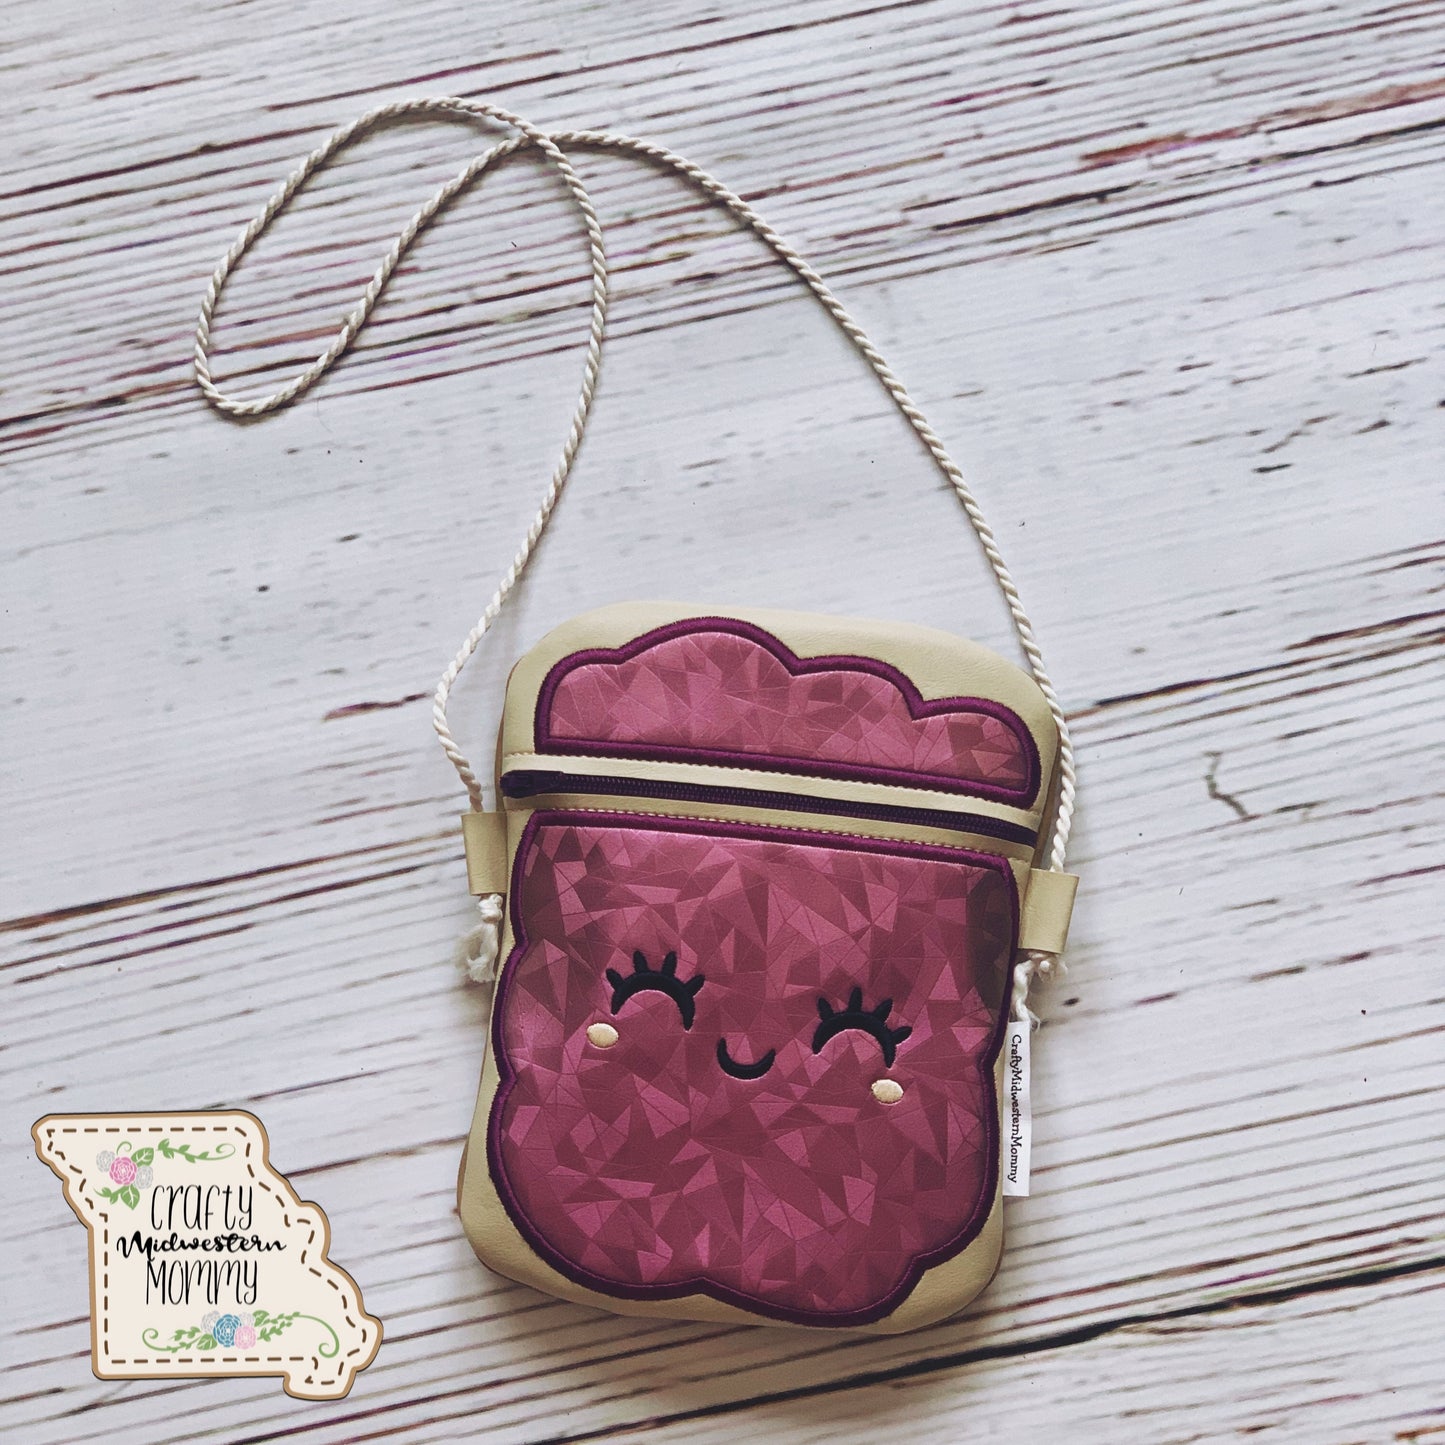 Peanut Butter and Jelly Purse